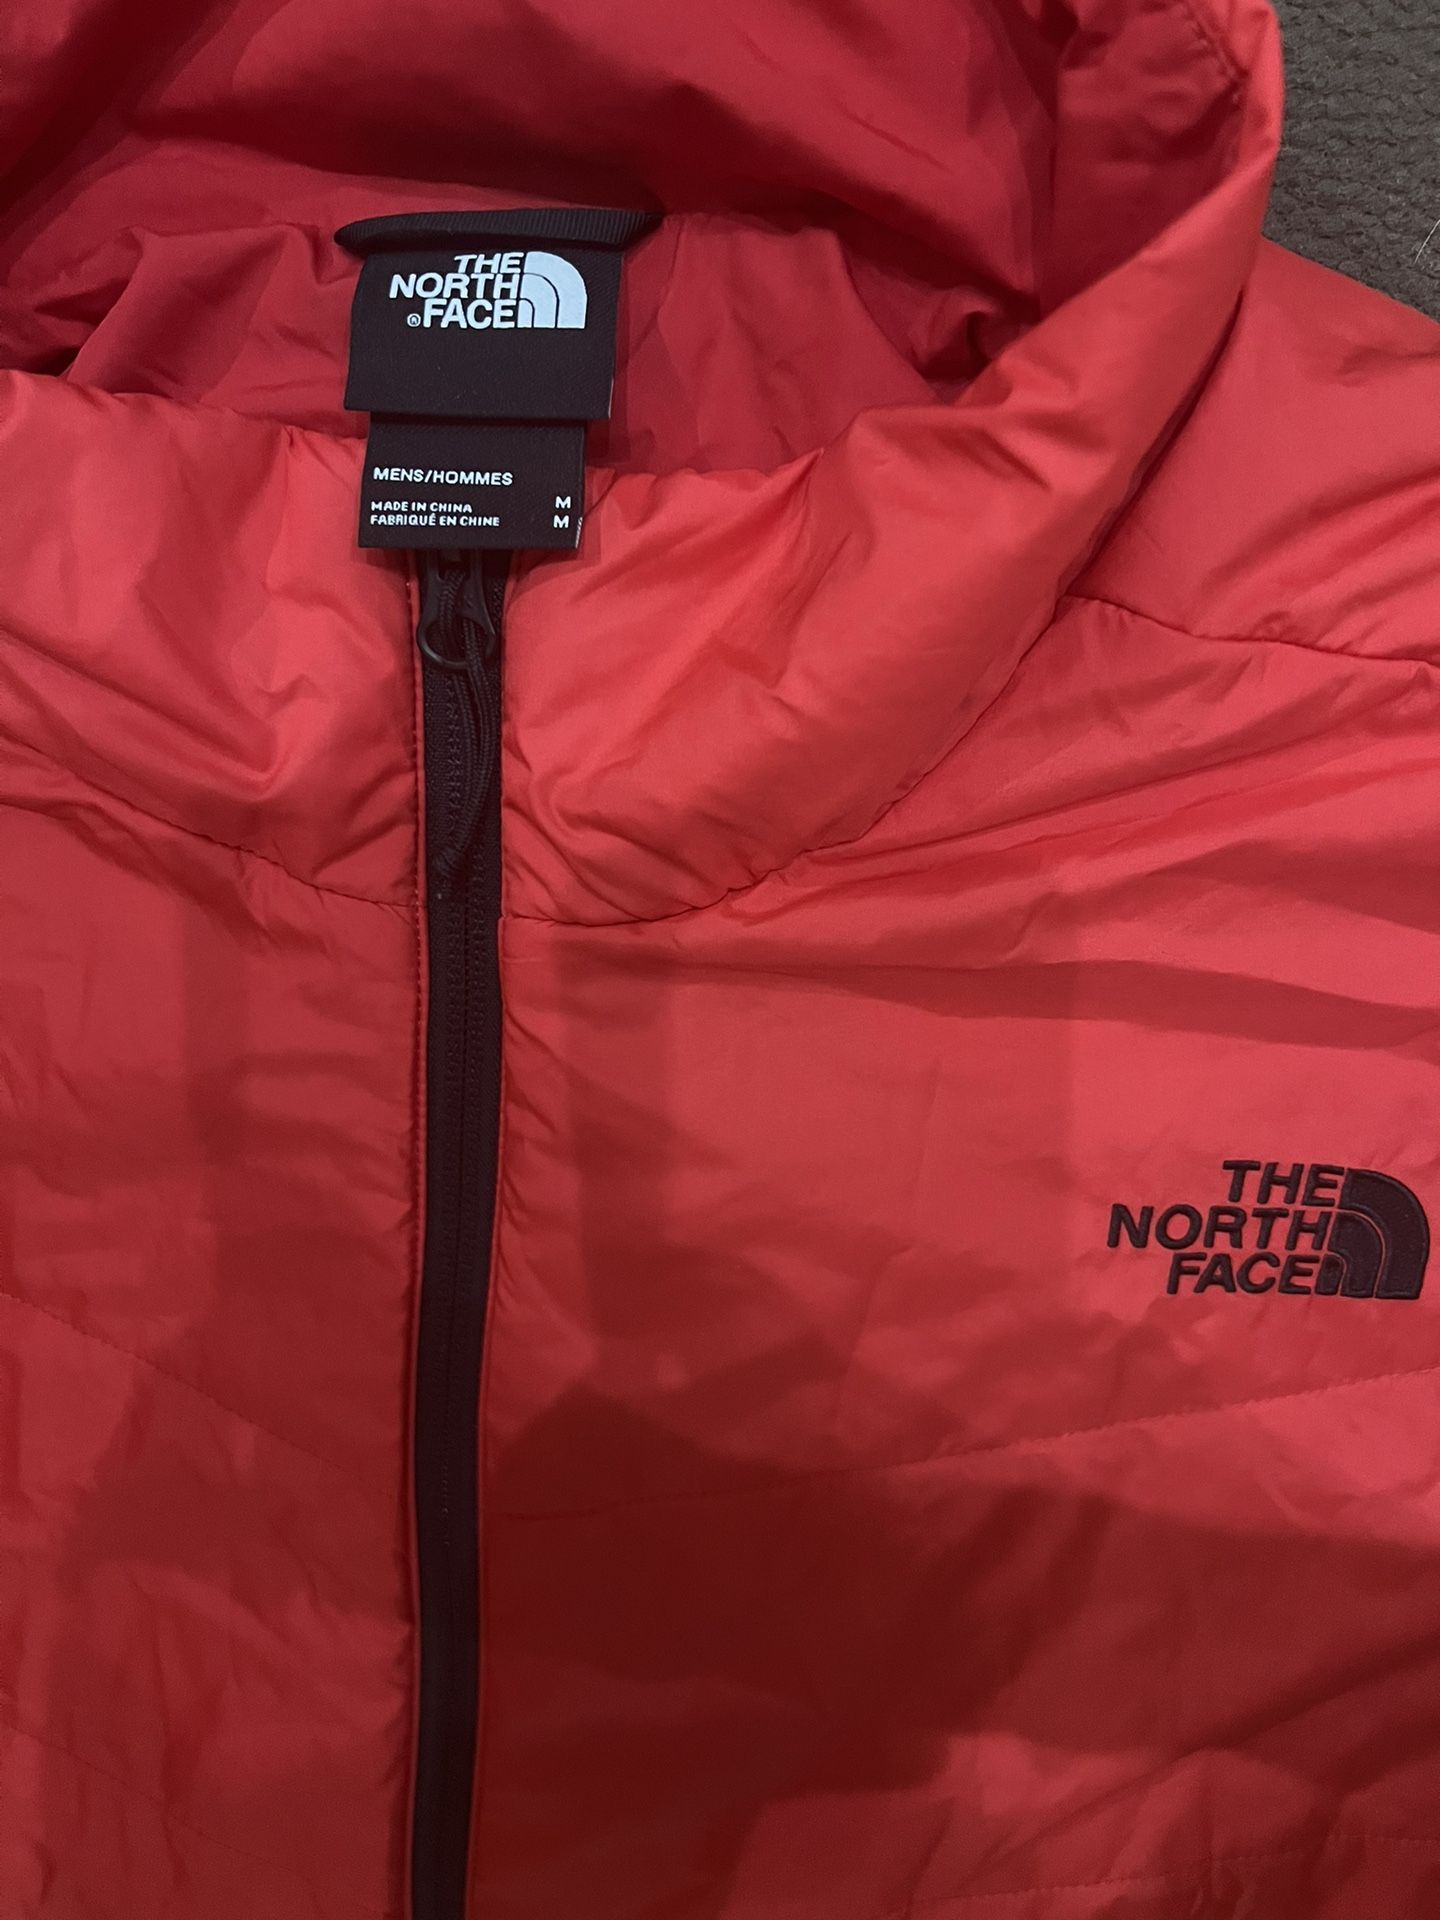 Men’s The North face red jacket size is Medium 